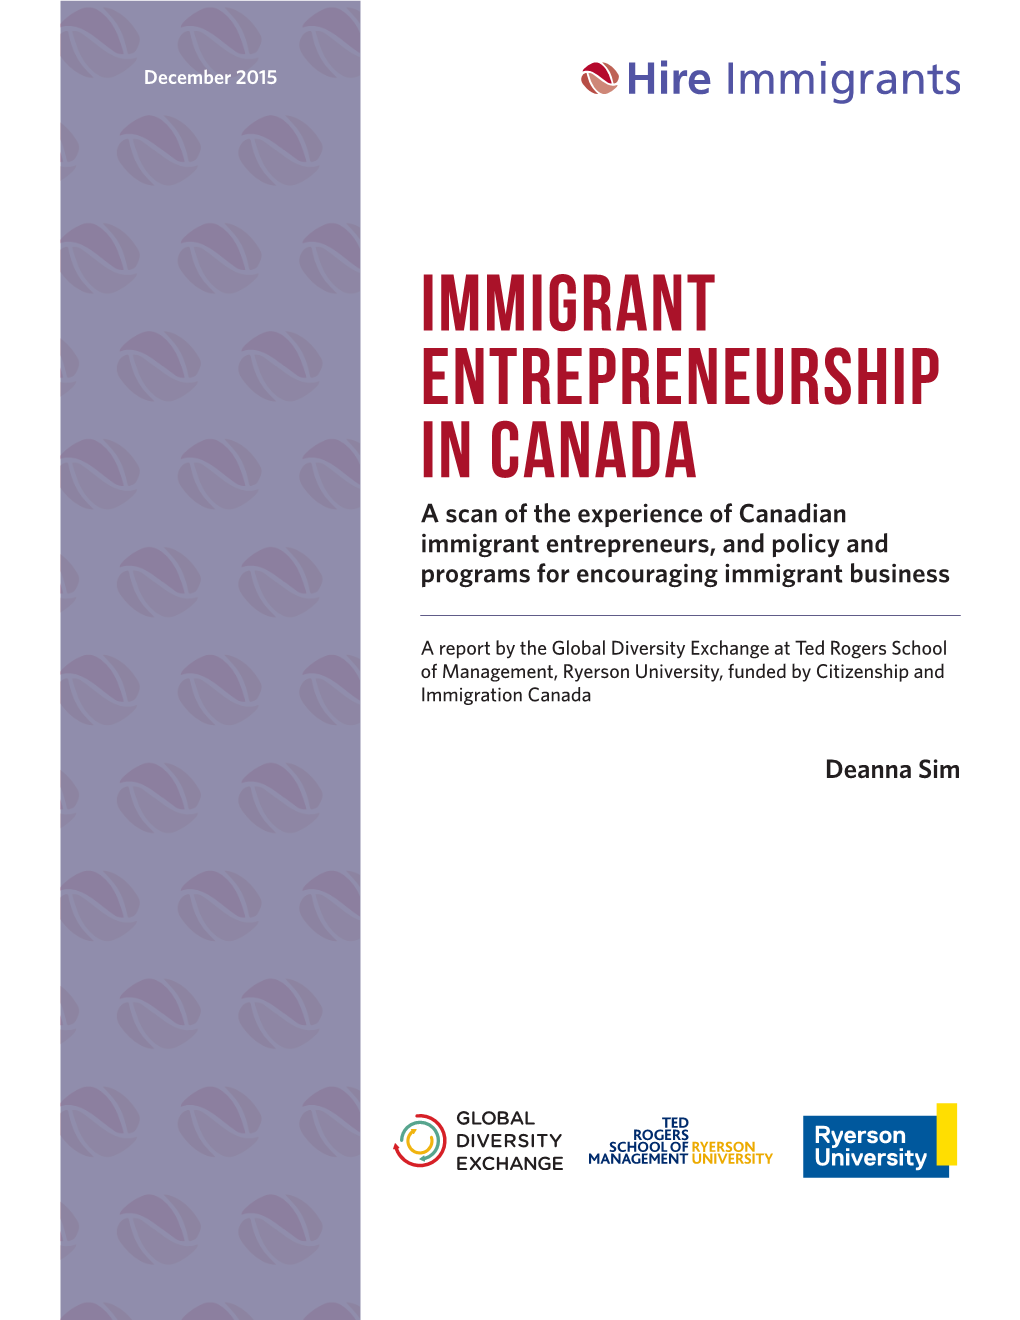 IMMIGRANT ENTREPRENEURSHIP in CANADA a Scan of the Experience of Canadian Immigrant Entrepreneurs, and Policy and Programs for Encouraging Immigrant Business